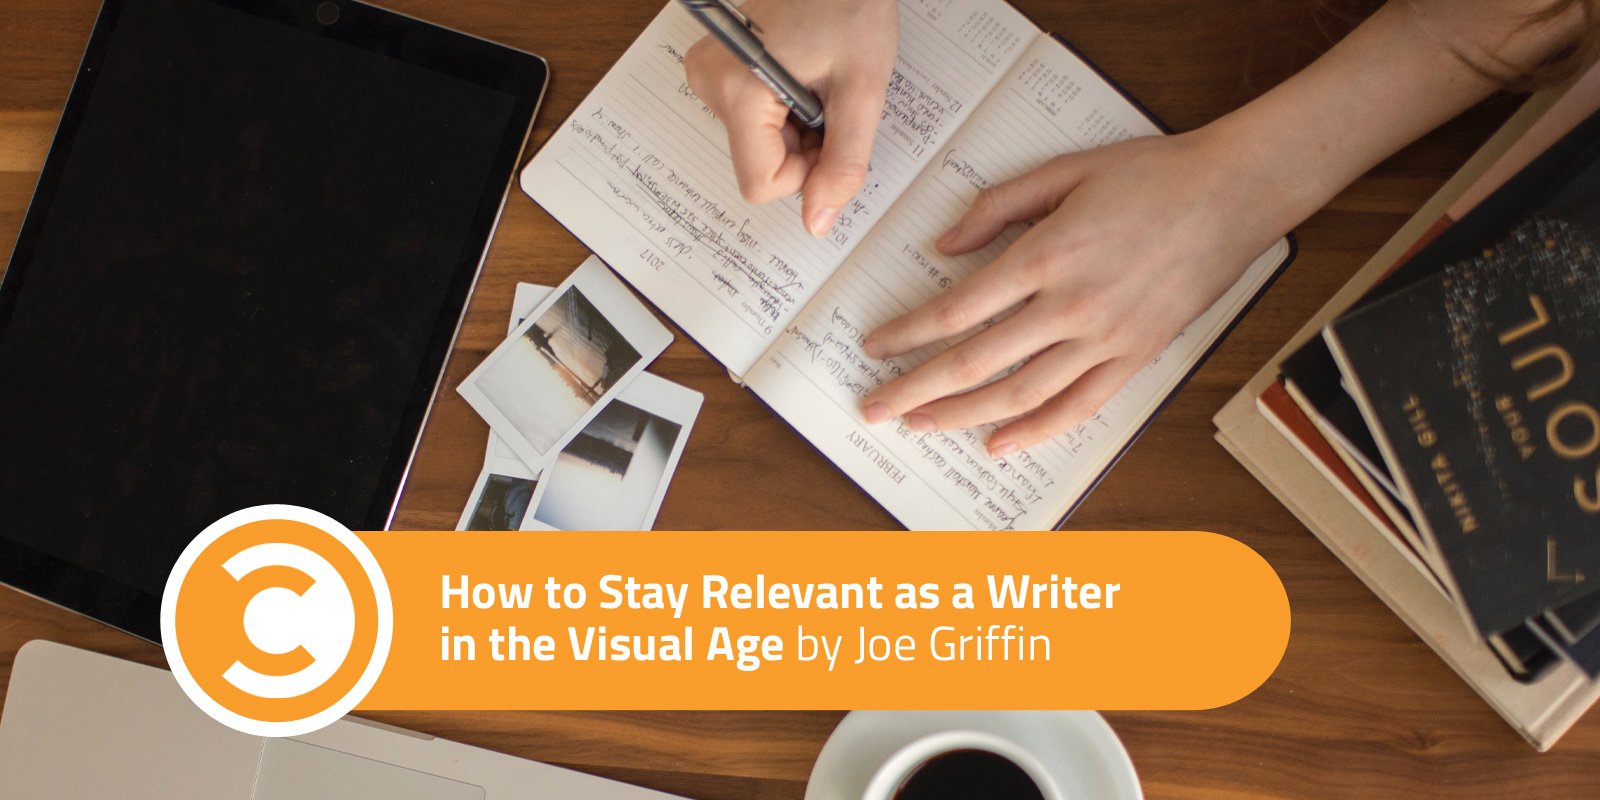 How to Stay Relevant as a Writer in the Visual Age